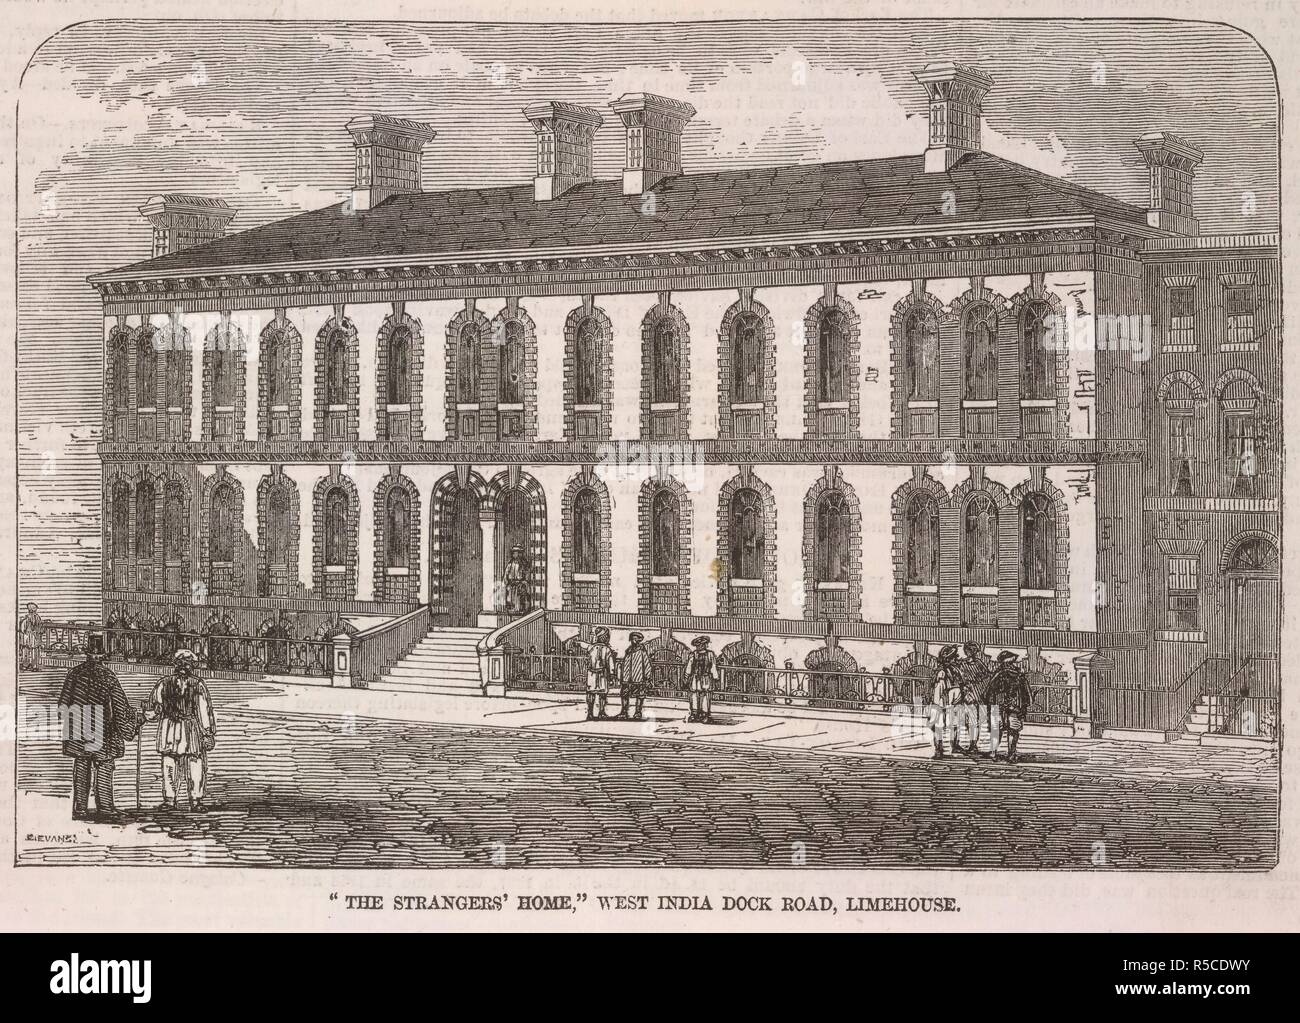 'The stranger's home', West Iindia dock road - Limehouse. The Stranger's Home in London, which was established in 1857 at West India Dock Road, Limehouse offered a comfortable and respectable lodging to every class of Asian, African and South-Sea Islander who came to England. Illustrated London News. London, 1857. Source: Illustrated London News, 28/02/1857 page 194. Stock Photo